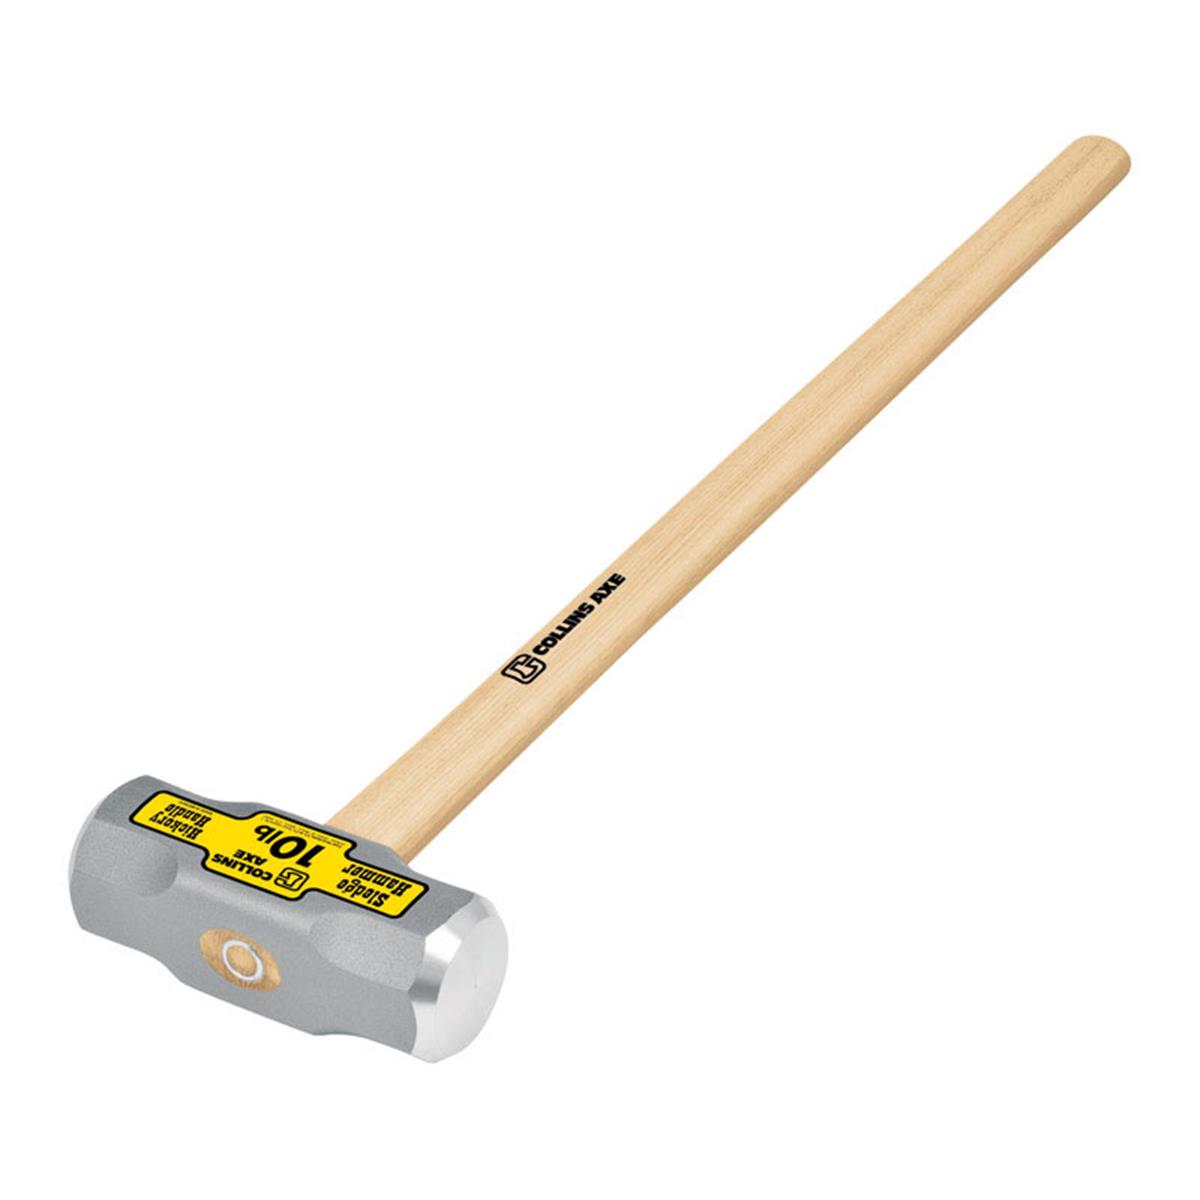 Md-10h-c32427 10 Lbs Double Face Sledge Hammer